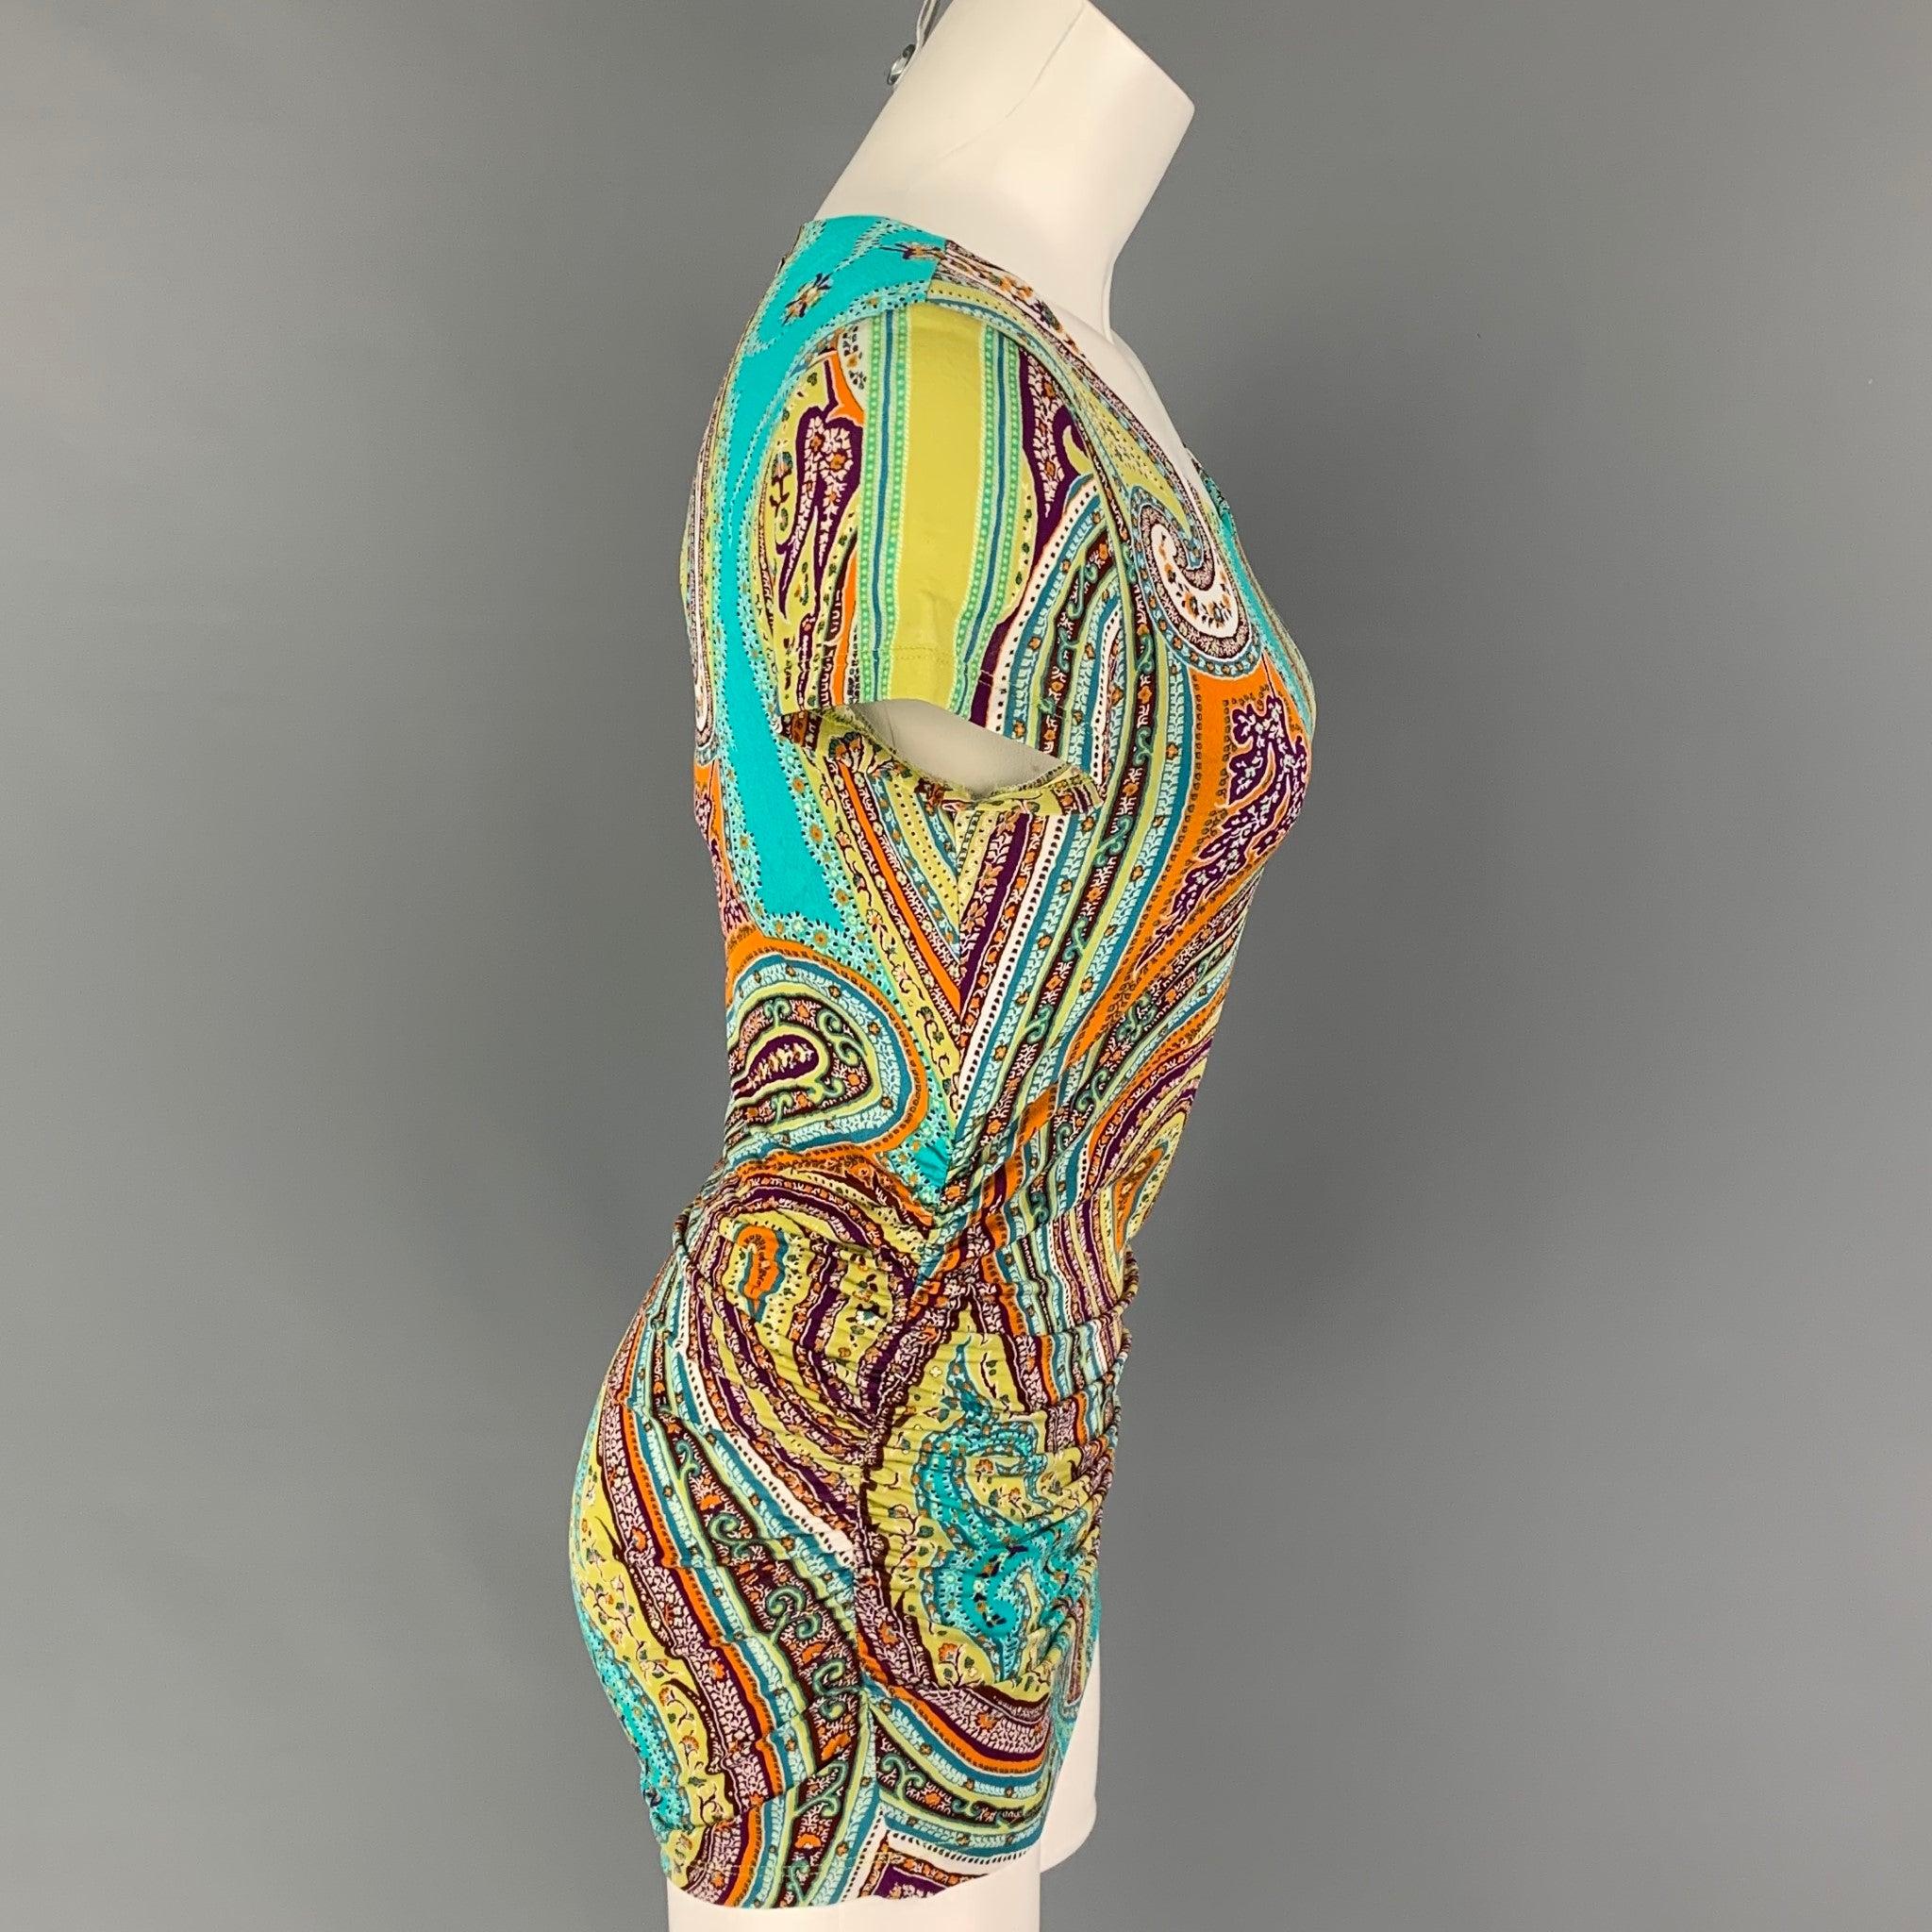 ETRO top comes in a turquoise / orange paisley viscose featuring ruched design and a wide neckline. Made in Italy.
Very Good
Pre-Owned Condition. 

Marked:   42 

Measurements: 
 
Shoulder: 15 inches  Bust: 30 inches  Sleeve: 6 inches  Length: 27